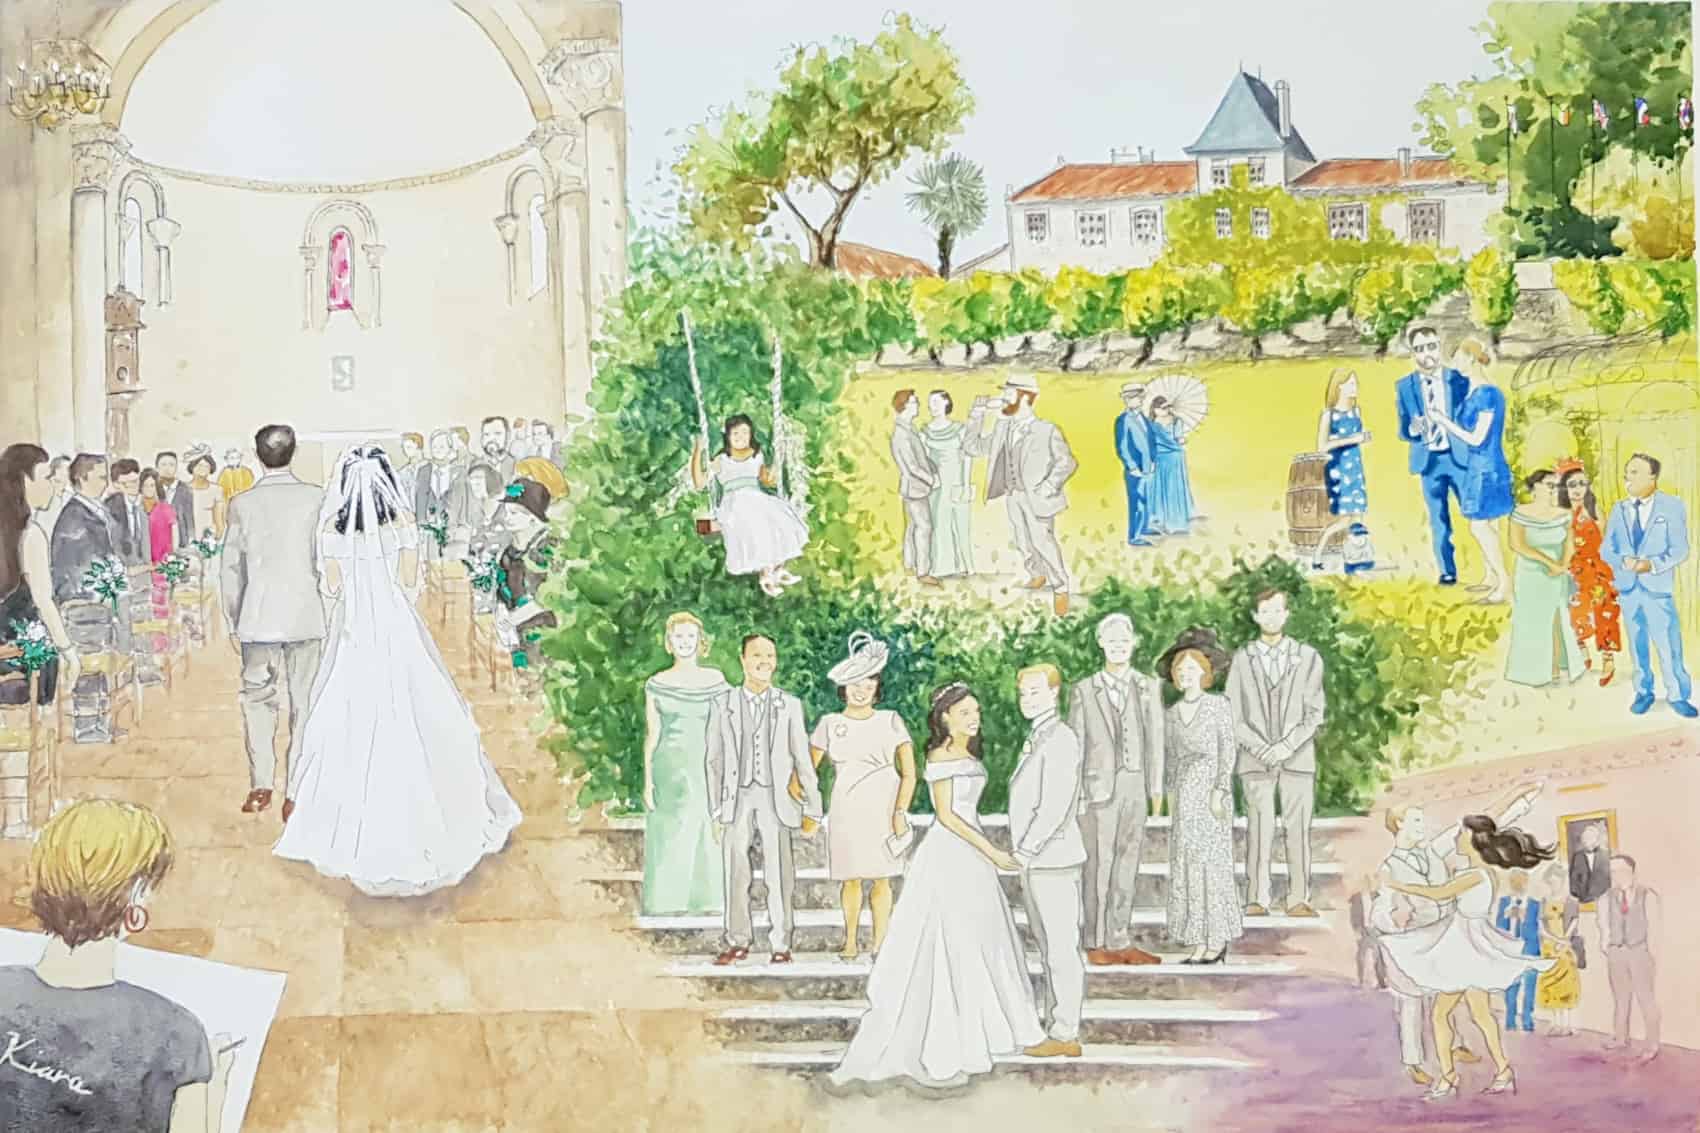 Live wedding painting in Bordeaux, France.